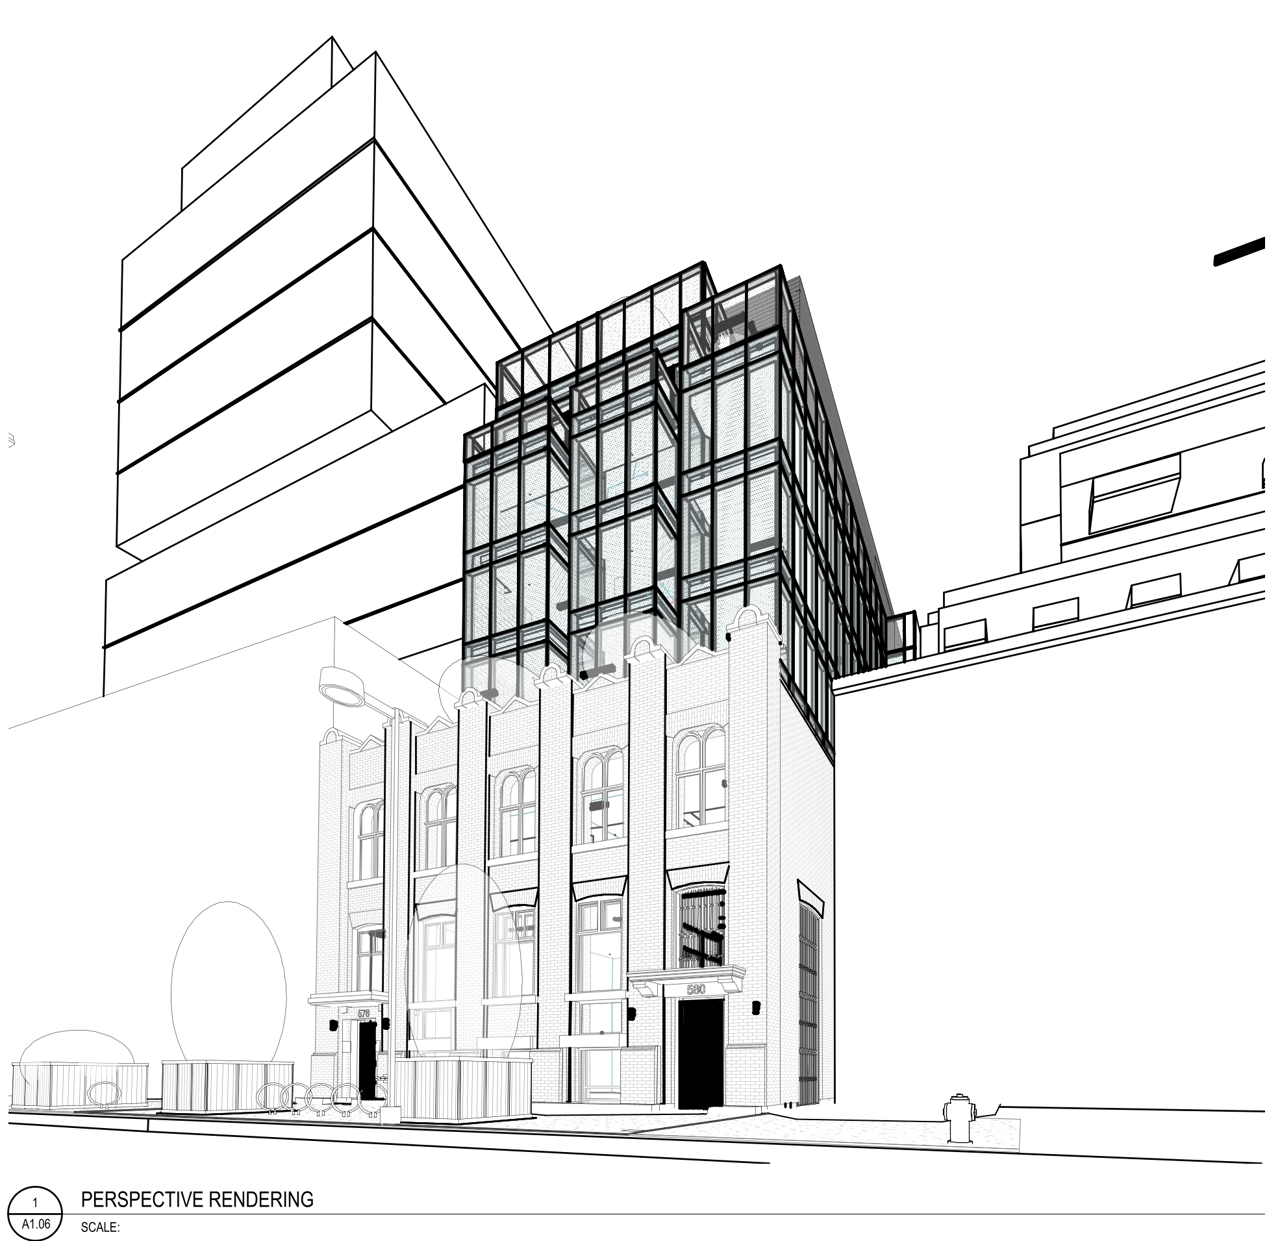 PLN - Architectural Plans - 1of4 - Architectural Plans (1 of 4)_578-580_King St W (1)-10.jpg